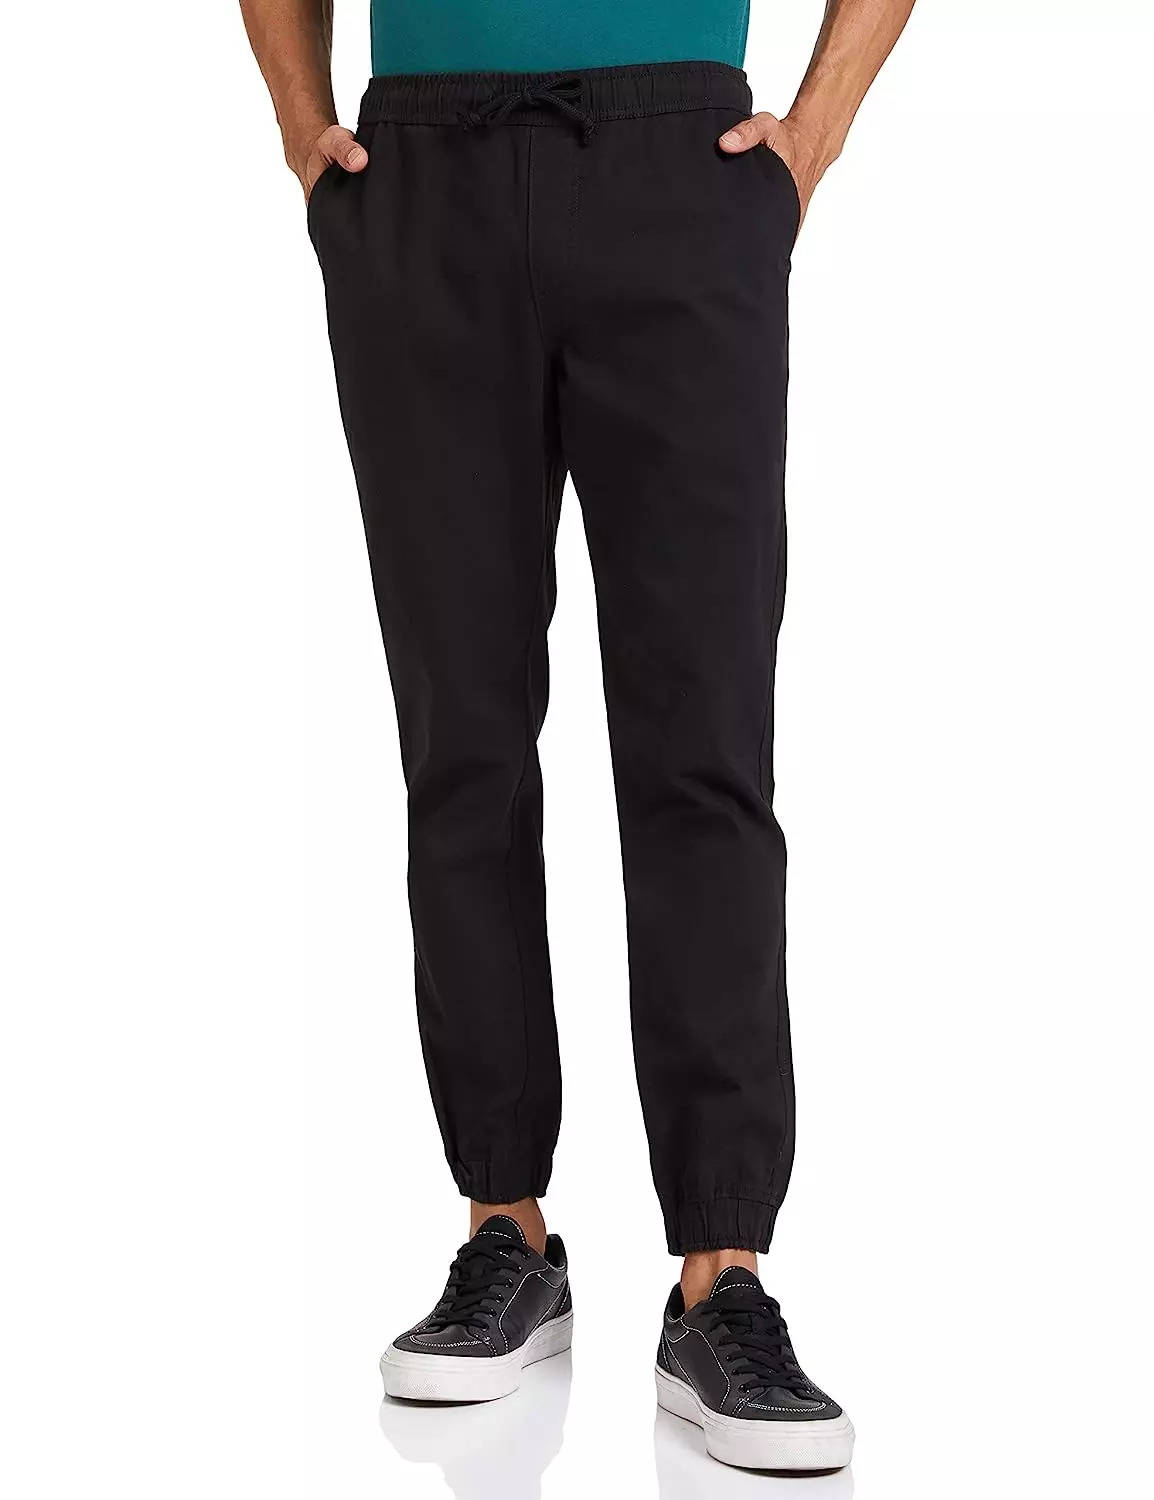 track pants at best price in Pune by Morya Garments | ID: 26159439088